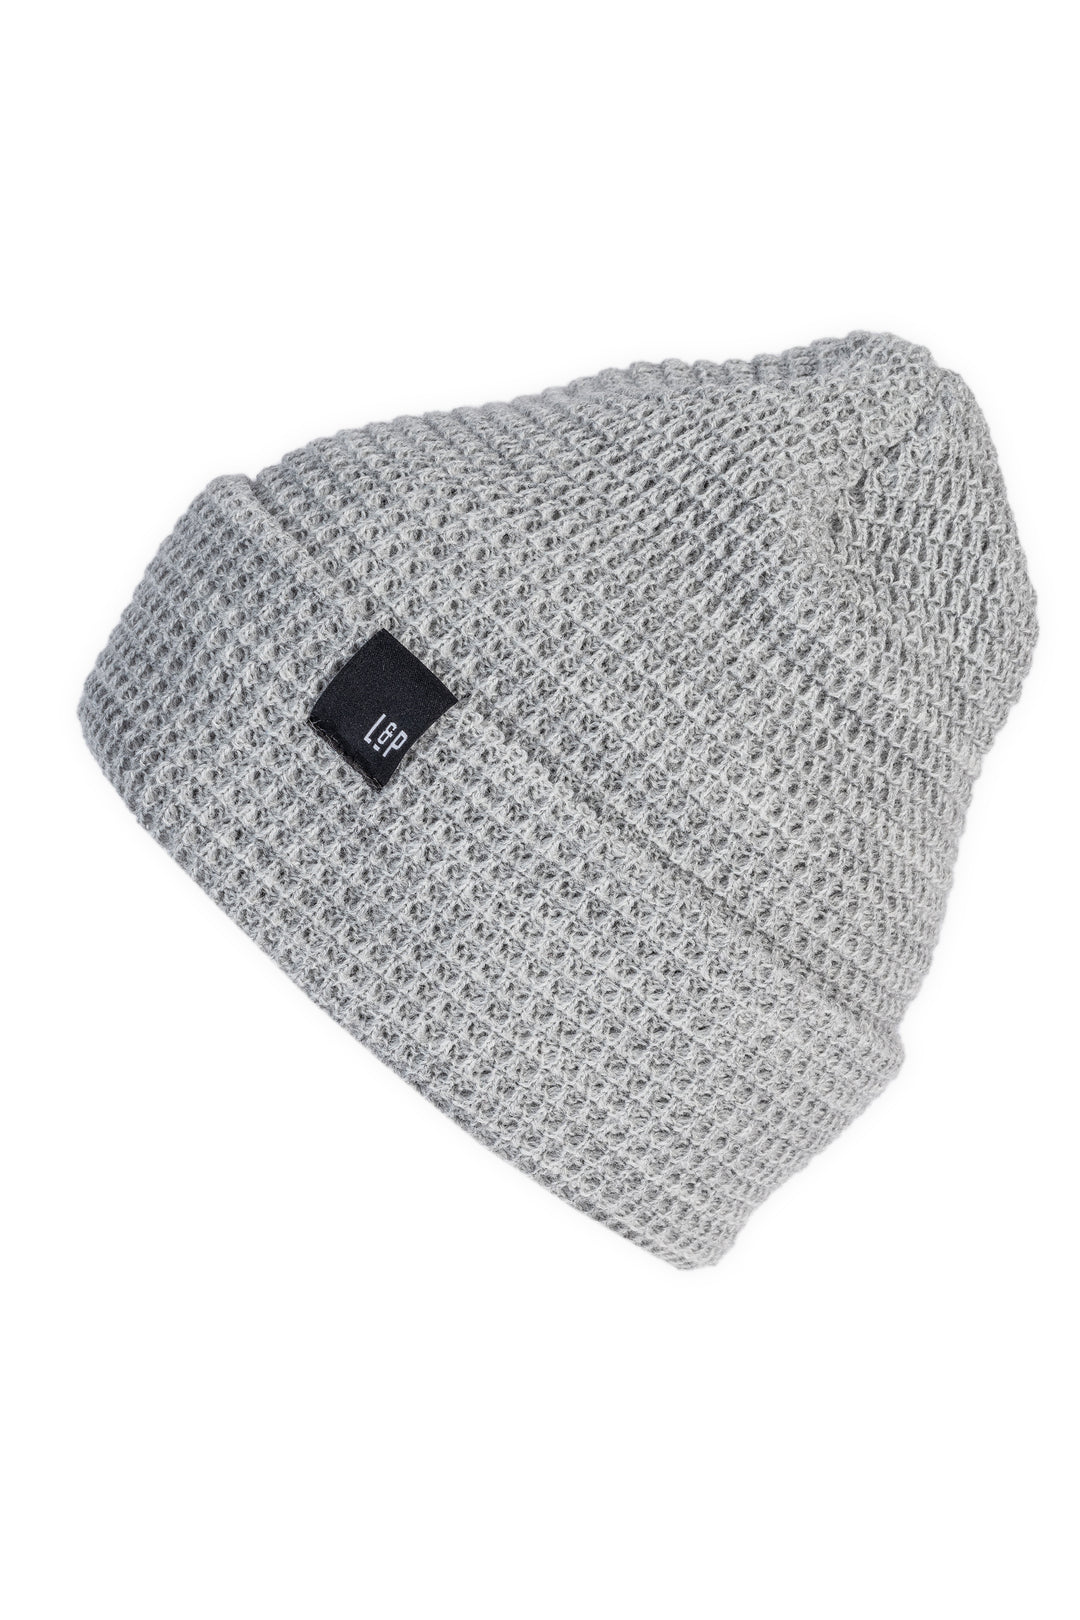 Waffle knit toque [Banff series] [Baby]